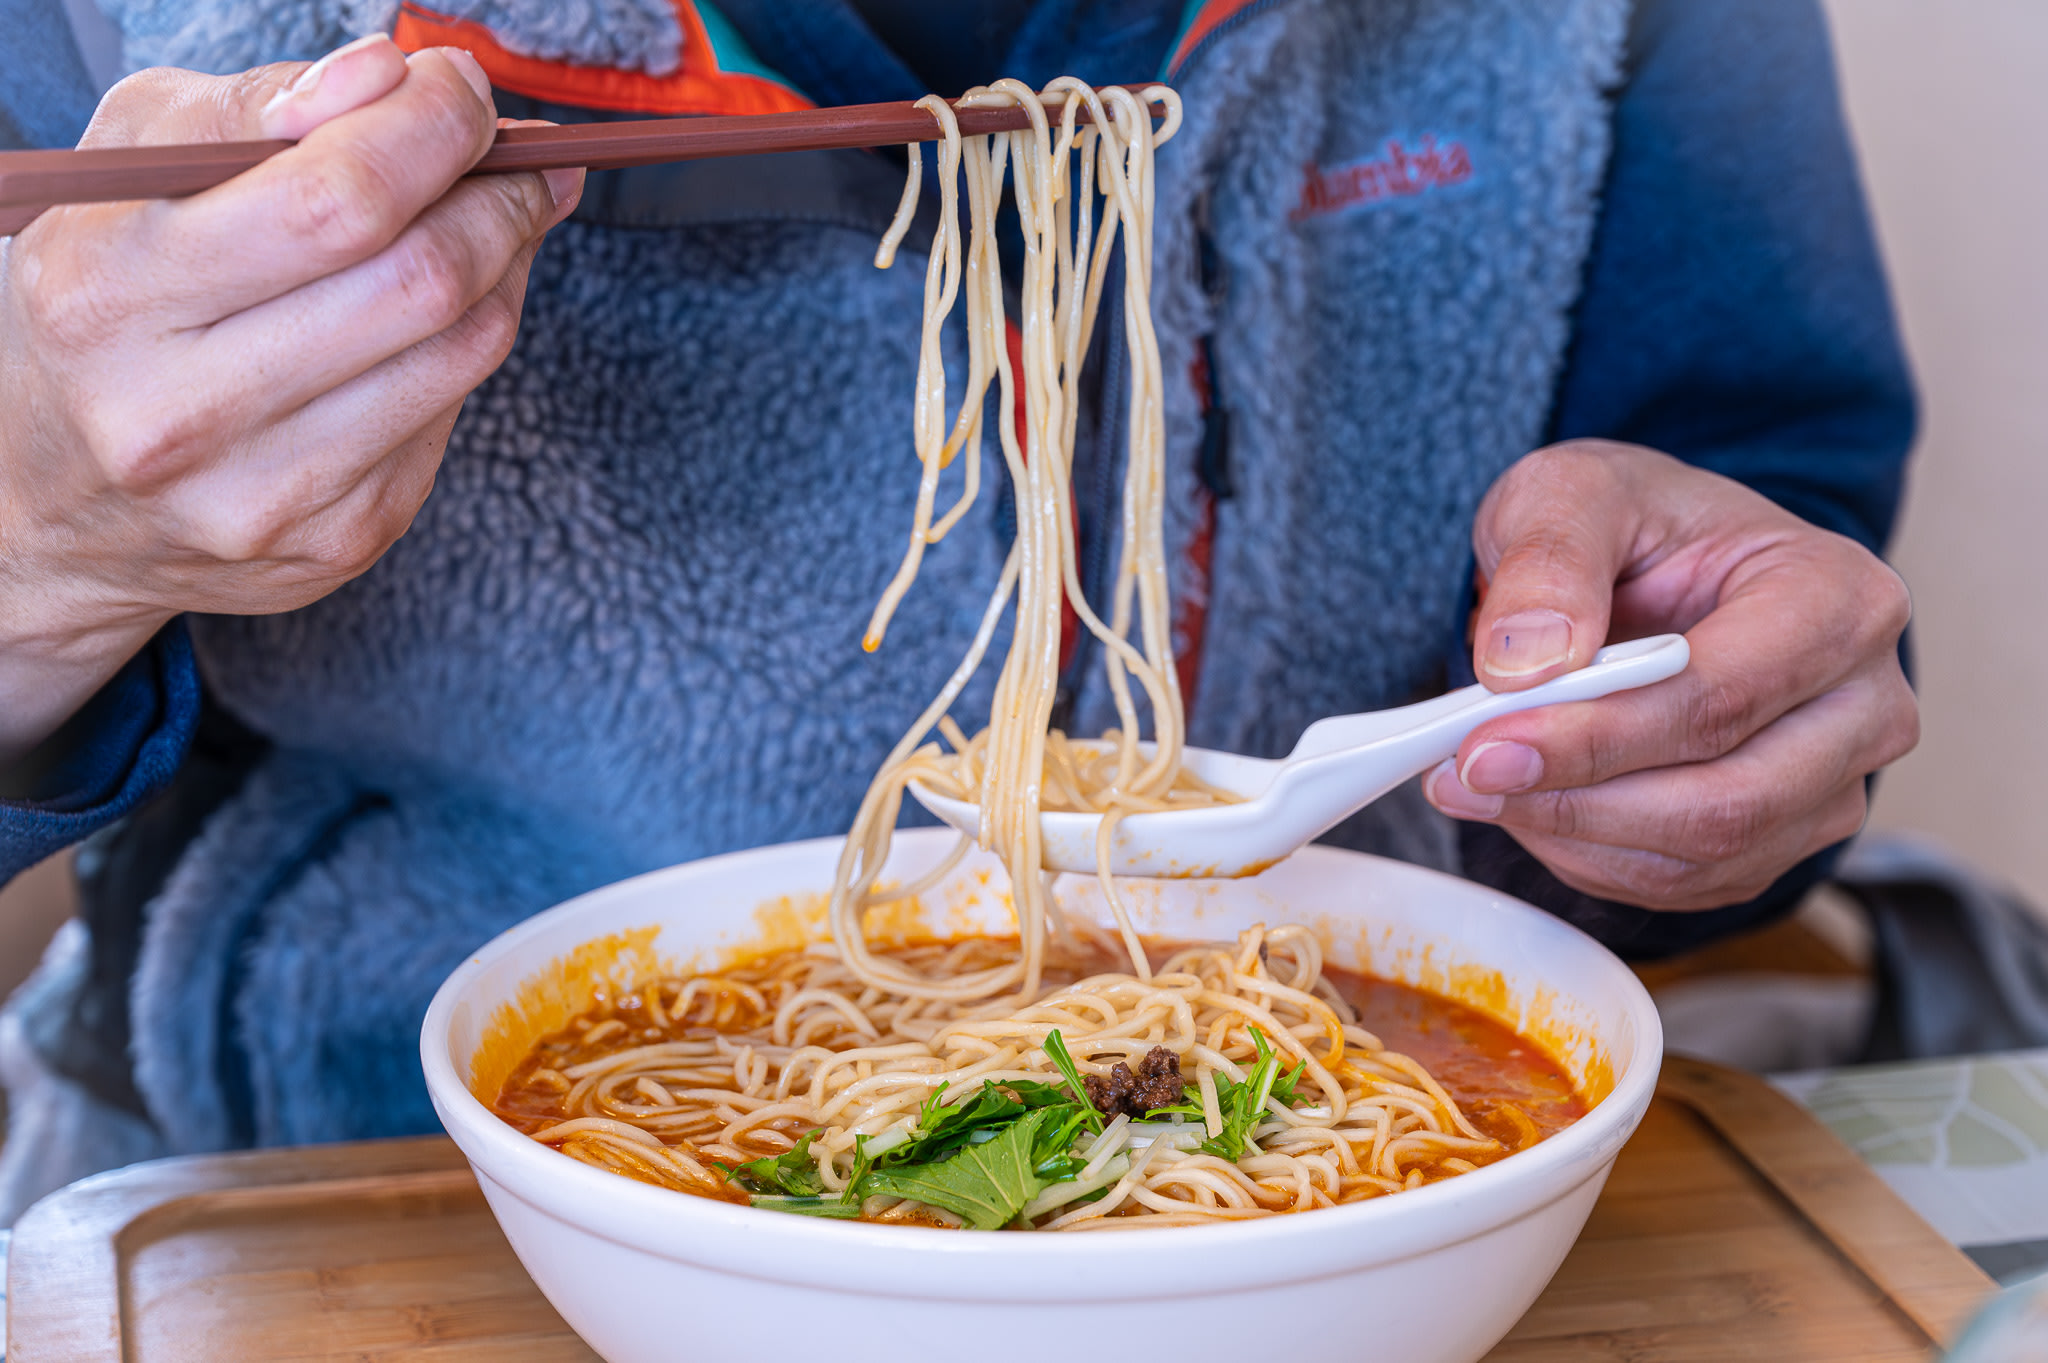 A man's hands use chopsticks and a spoon to lift noodles from a bowl of dandan ramen (spicy Sichuan-style ramen). The broth is bright red and looks very spicy.